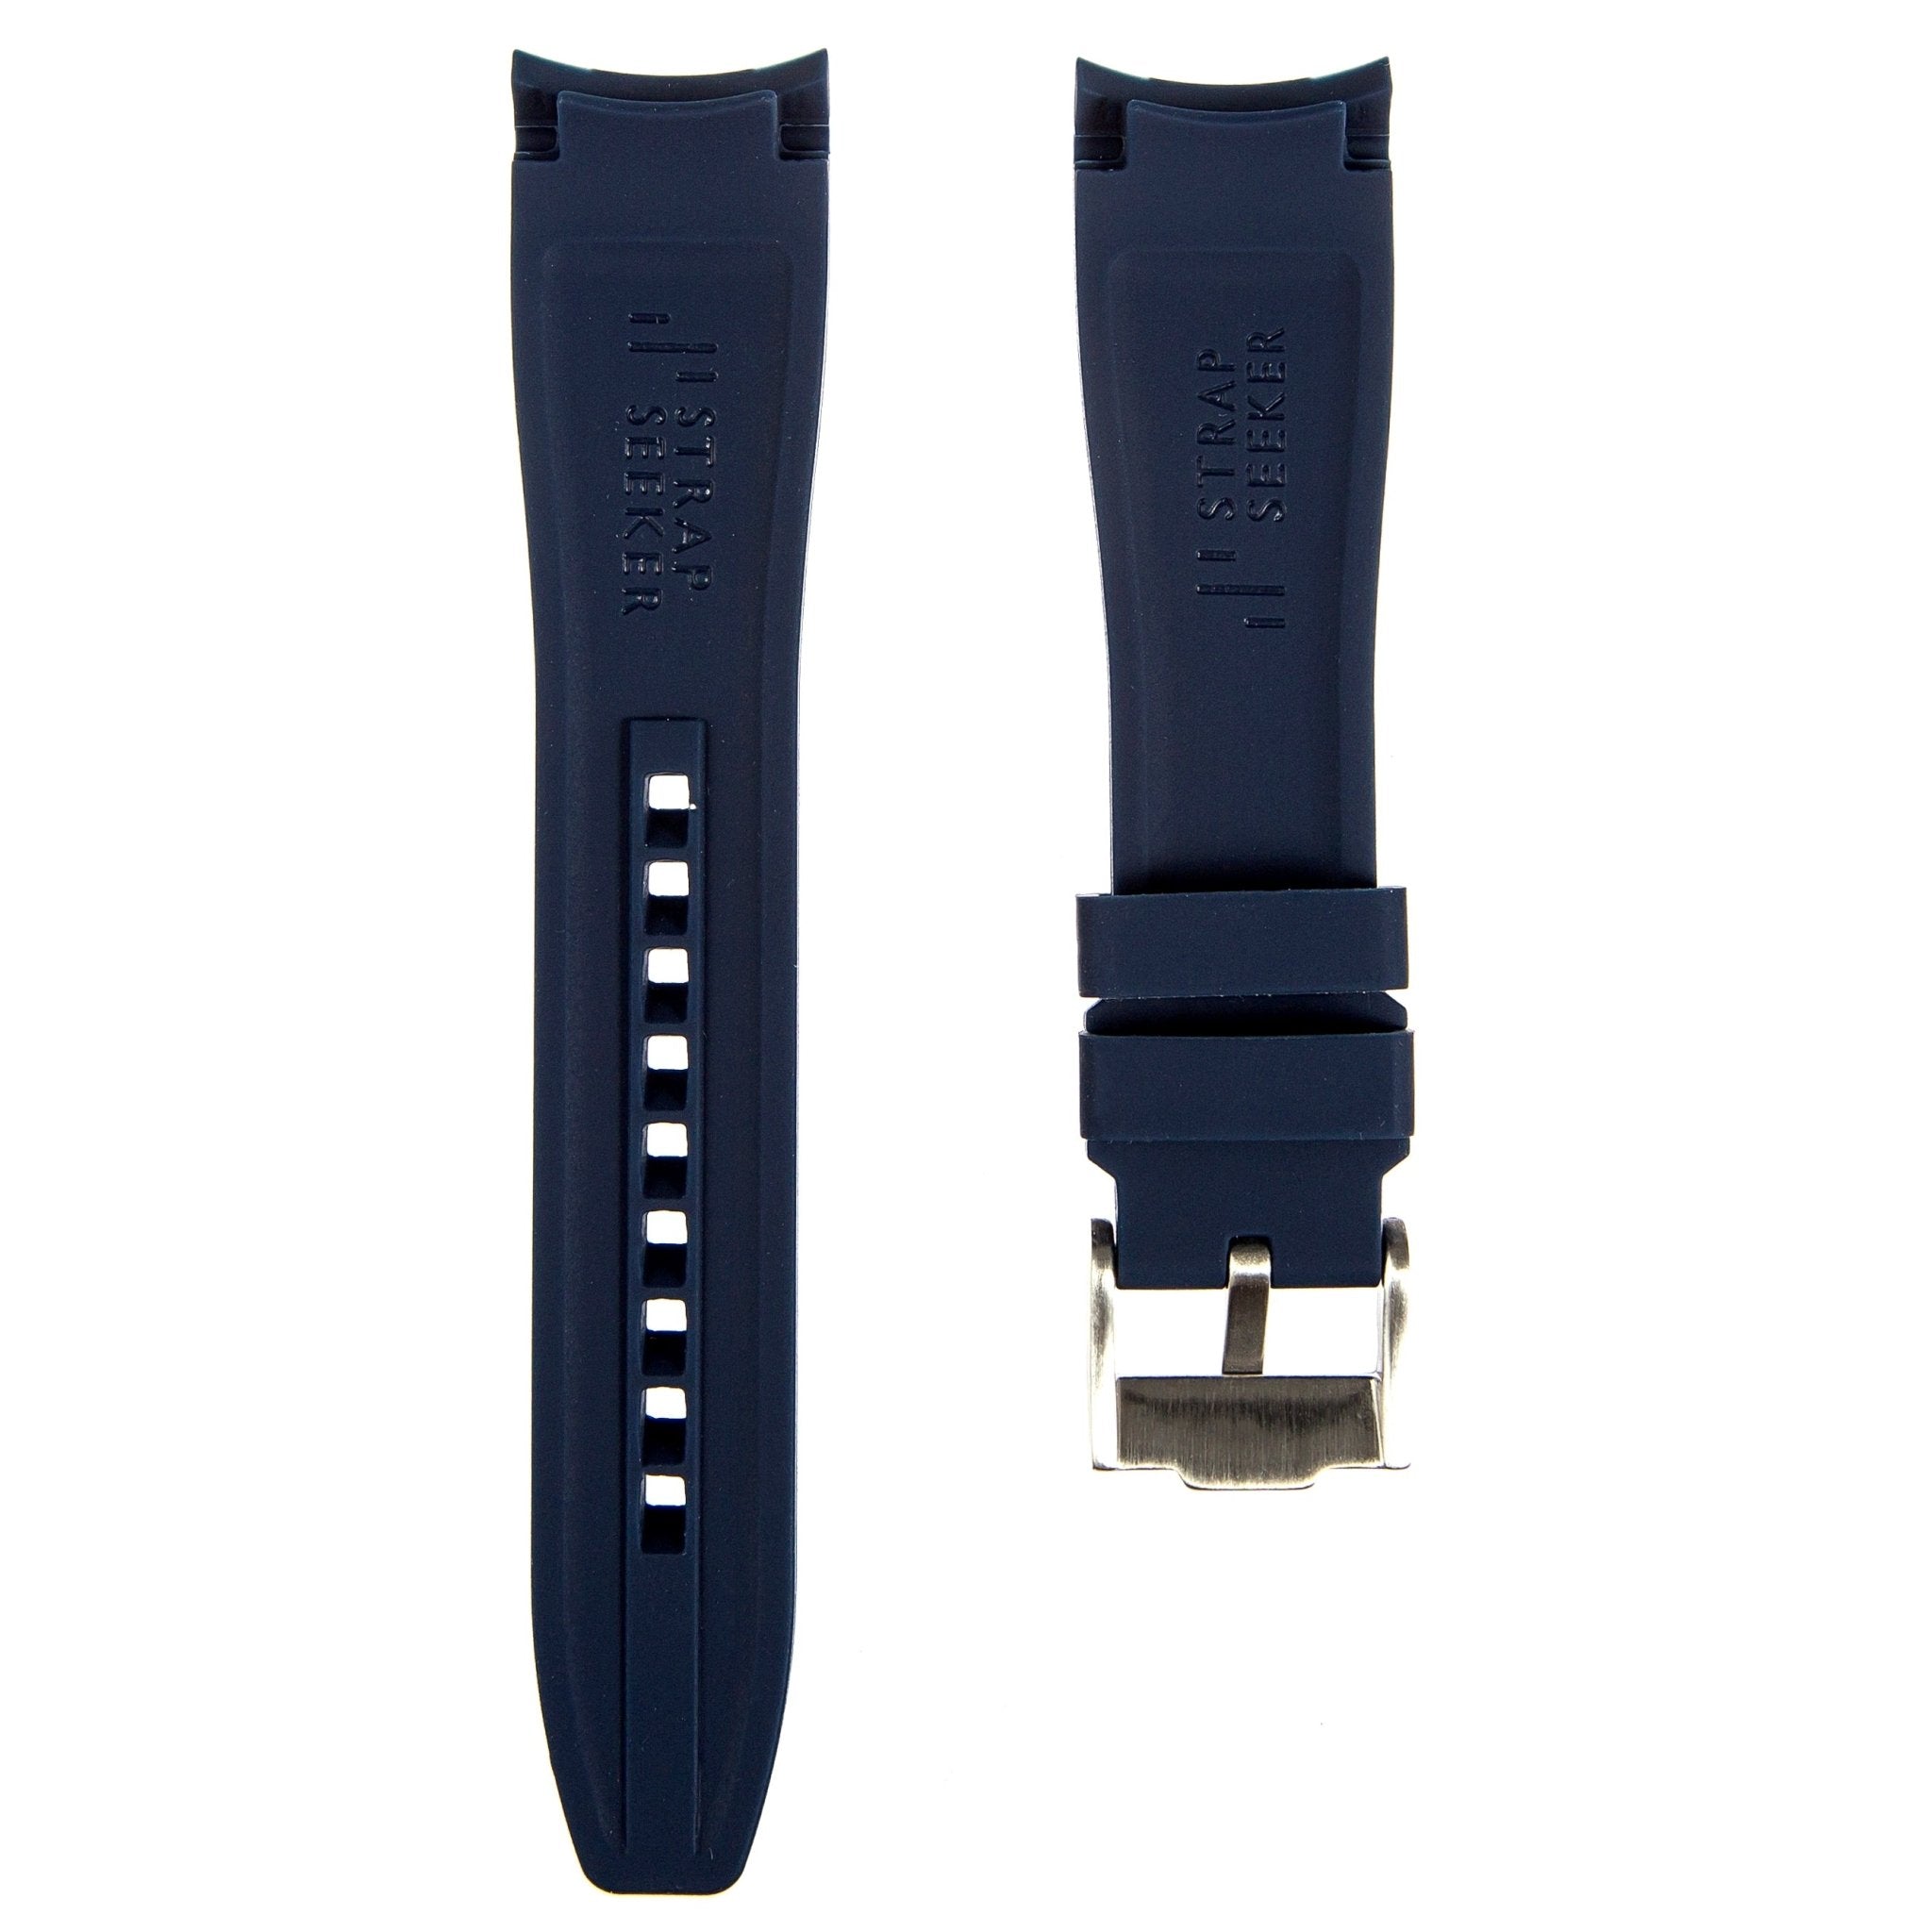 Curved End Soft Silicone Strap - Compatible with Rolex Submariner - Navy (2418) -StrapSeeker